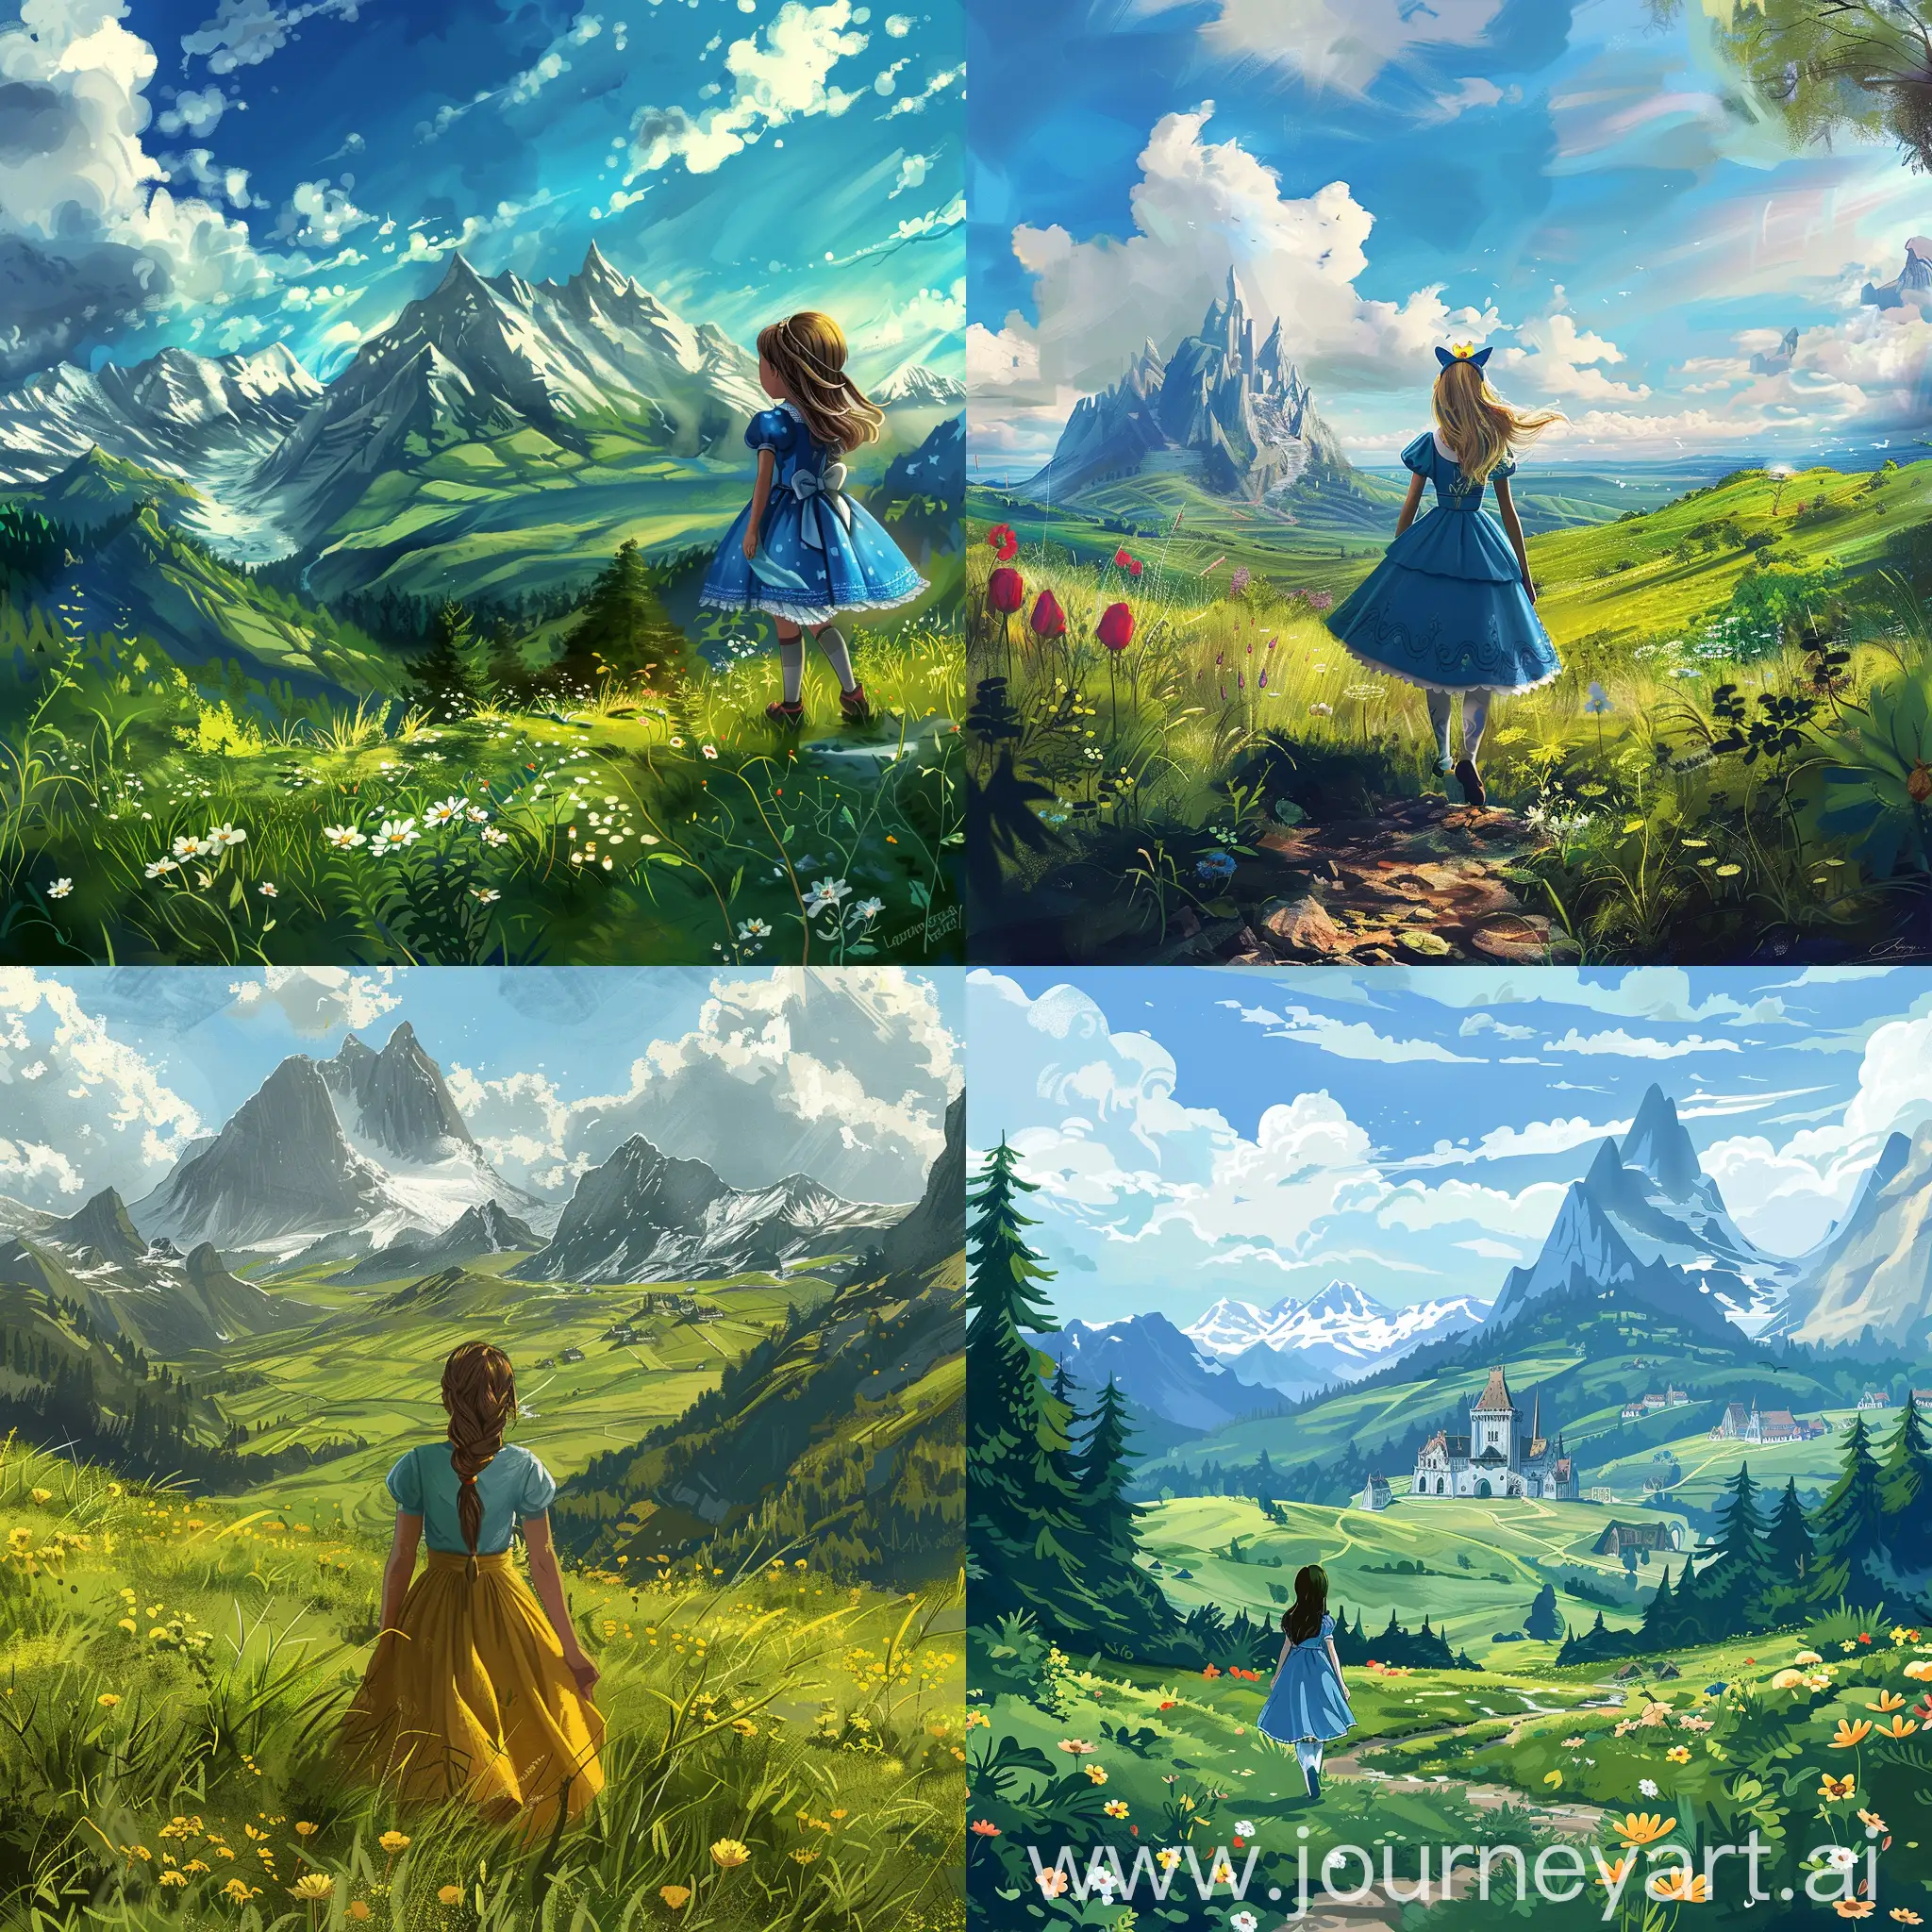 Alice-in-a-Faraway-Kingdom-Girl-Amidst-Green-Meadows-and-High-Mountains